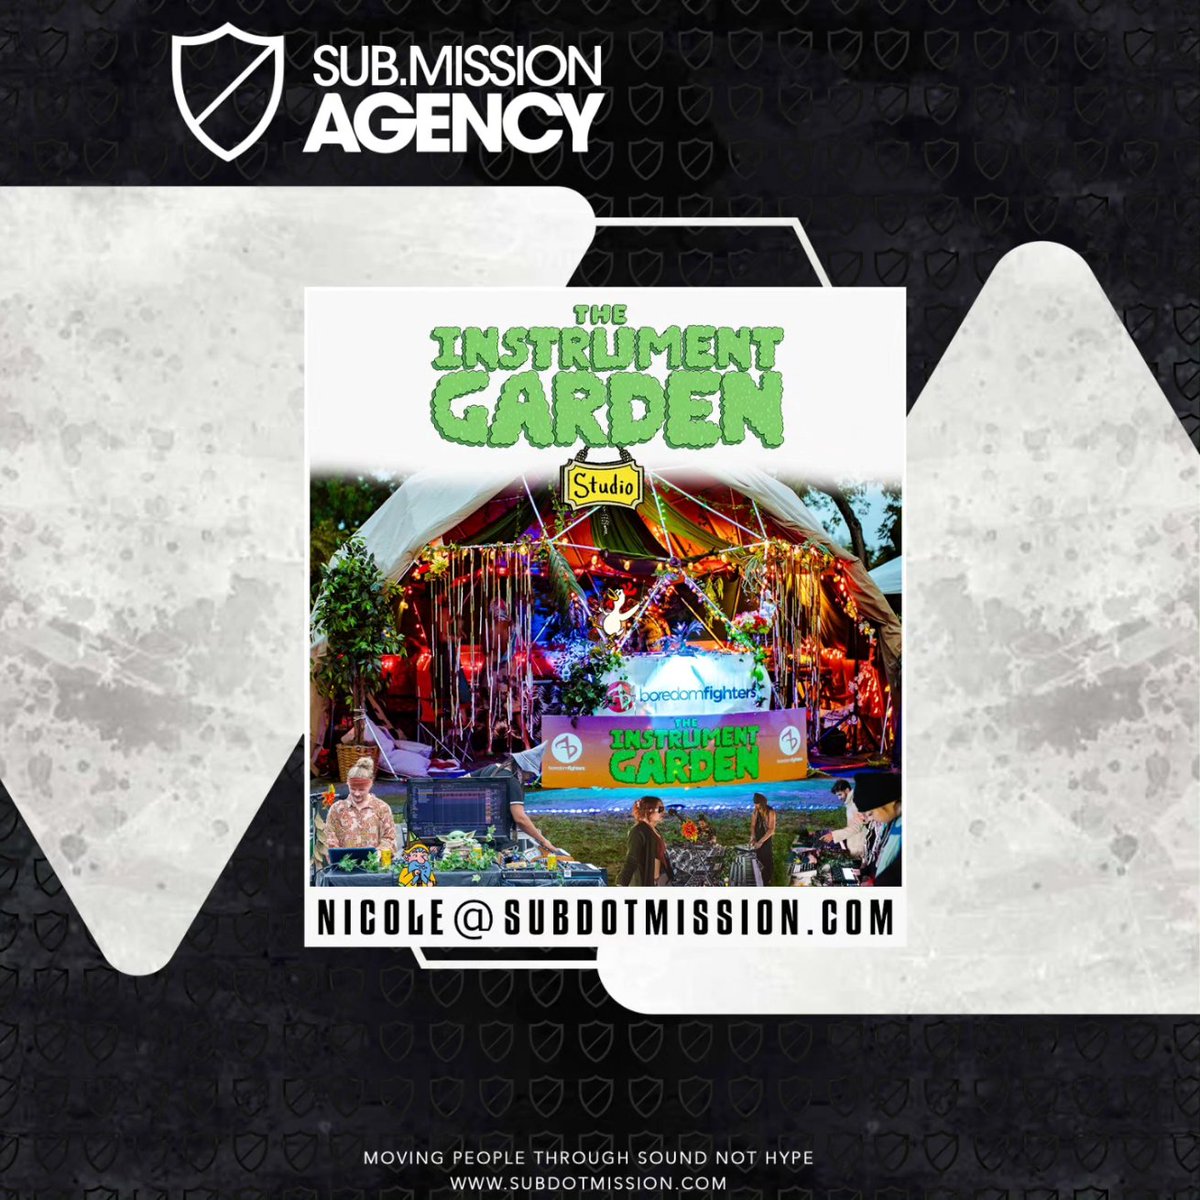 - NEW ARTIST ANNOUNCEMENT - We are excited to welcome The Instrument Garden by the @brdmfghtrs to the Sub.mission Agency! We will be handling all of their festival bookings moving forward!